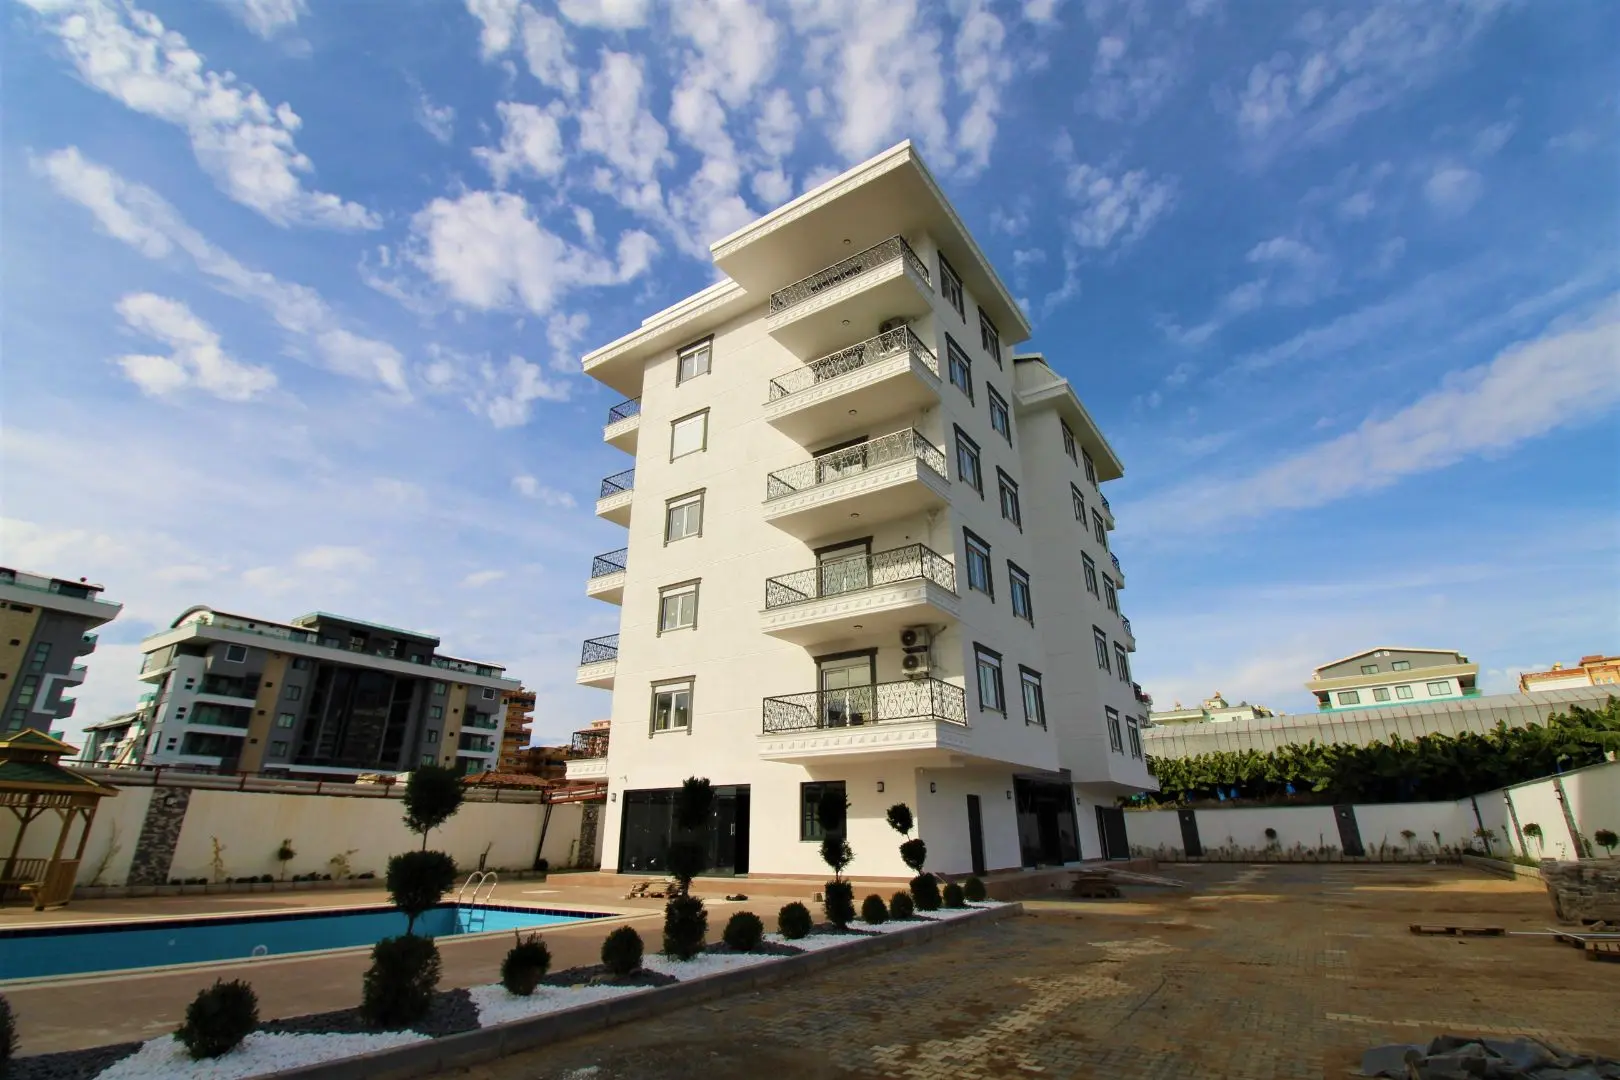 NEW FULLY FURNISHED 1+1 FLAT FOR RENT IN KARGICAK, ALANYA